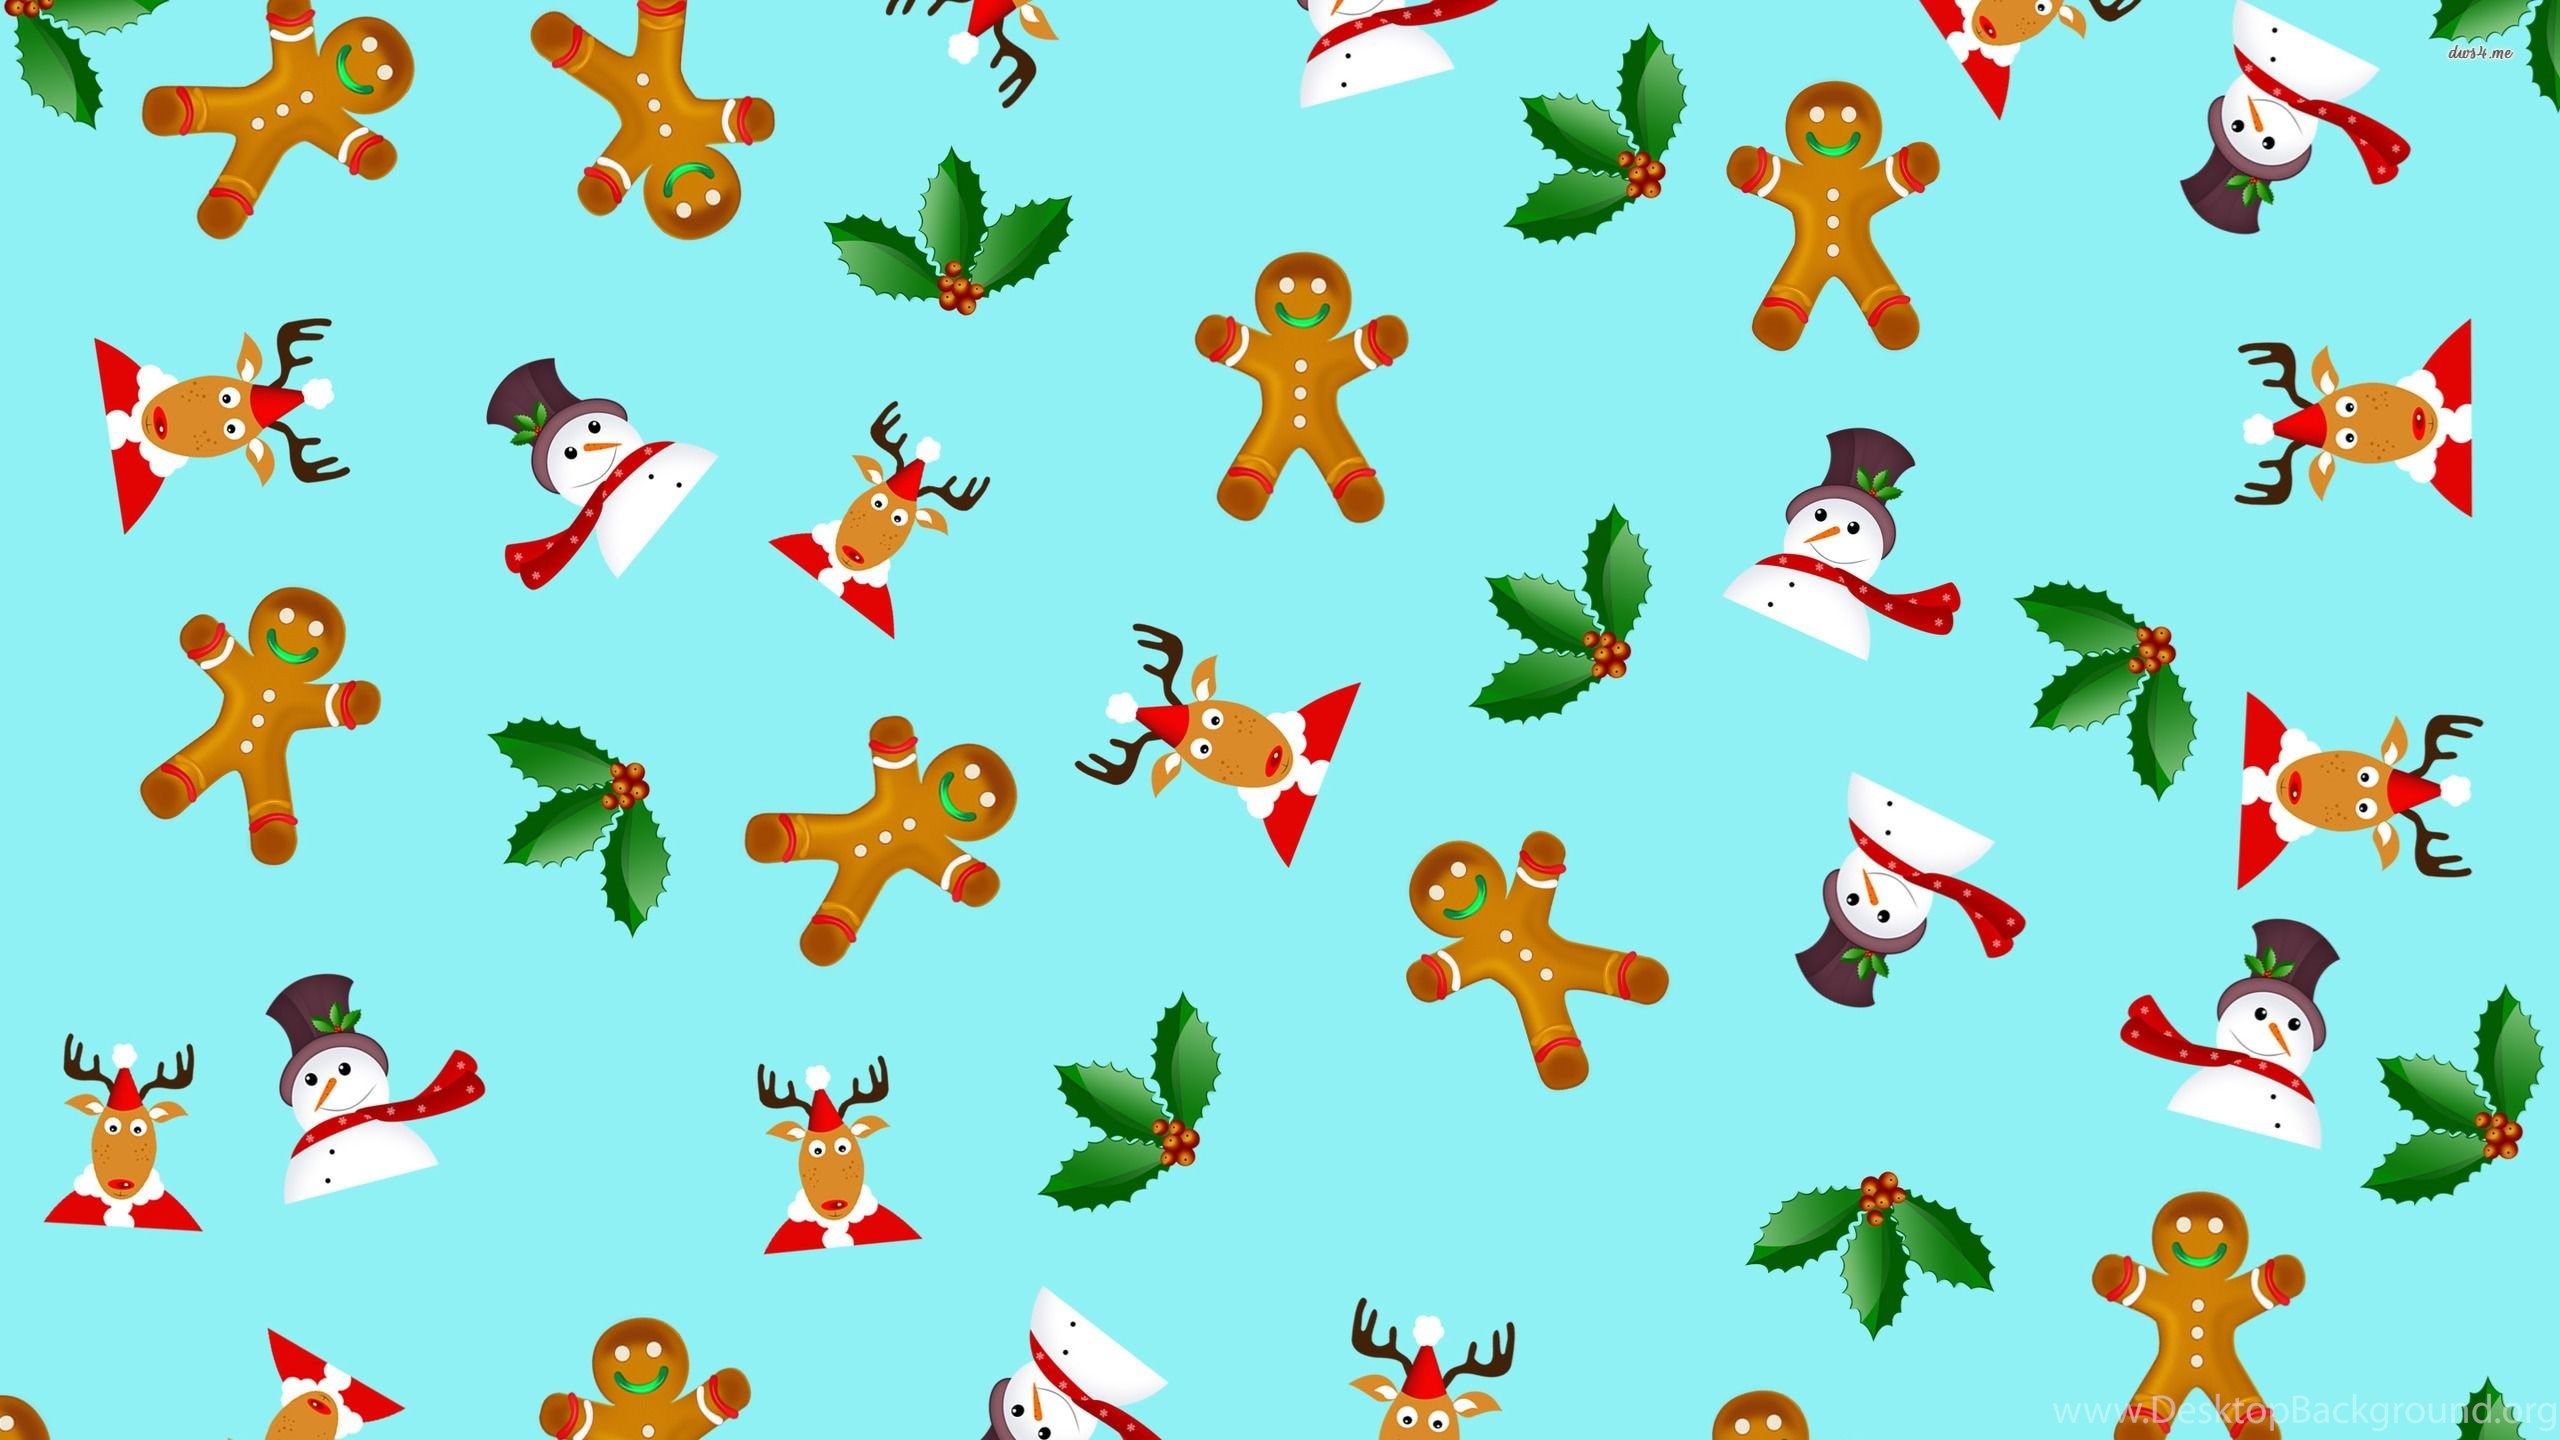 994100 Christmas Pattern Stock Photos Pictures  RoyaltyFree Images   iStock  Christmas background Christmas party Christmas tree